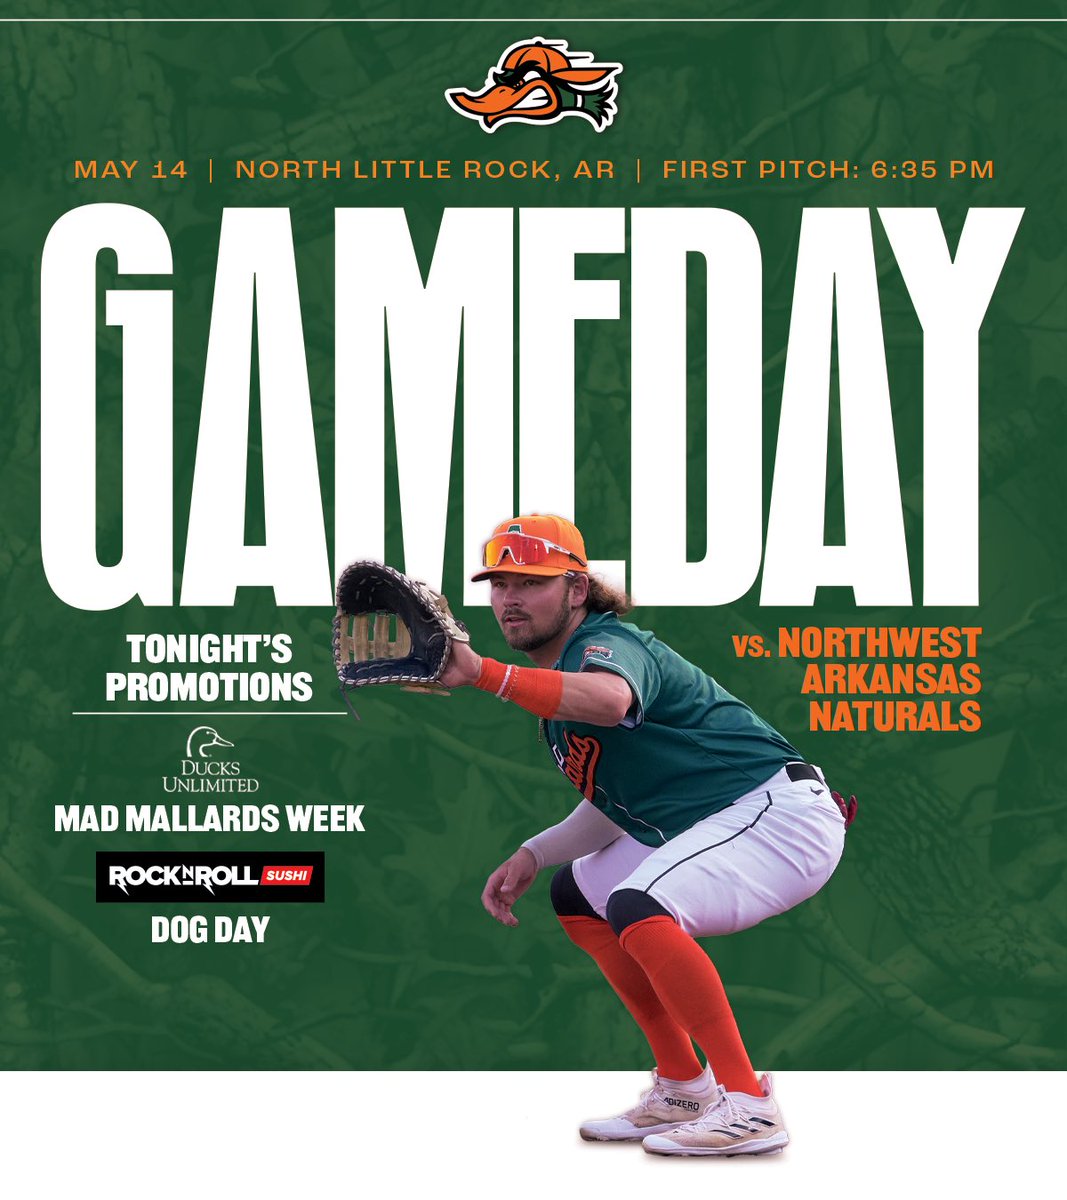 The Natural State Showdown starts TONIGHT! 💎 Thanks to @DucksUnlimited, the Mad Mallards will be taking on the Northwest Arkansas Naturals all week! Tonight is also our first Dog Day of the week, presented by Rock N’ Roll Sushi. 🎟️: milb.com/arkansas/ticke…